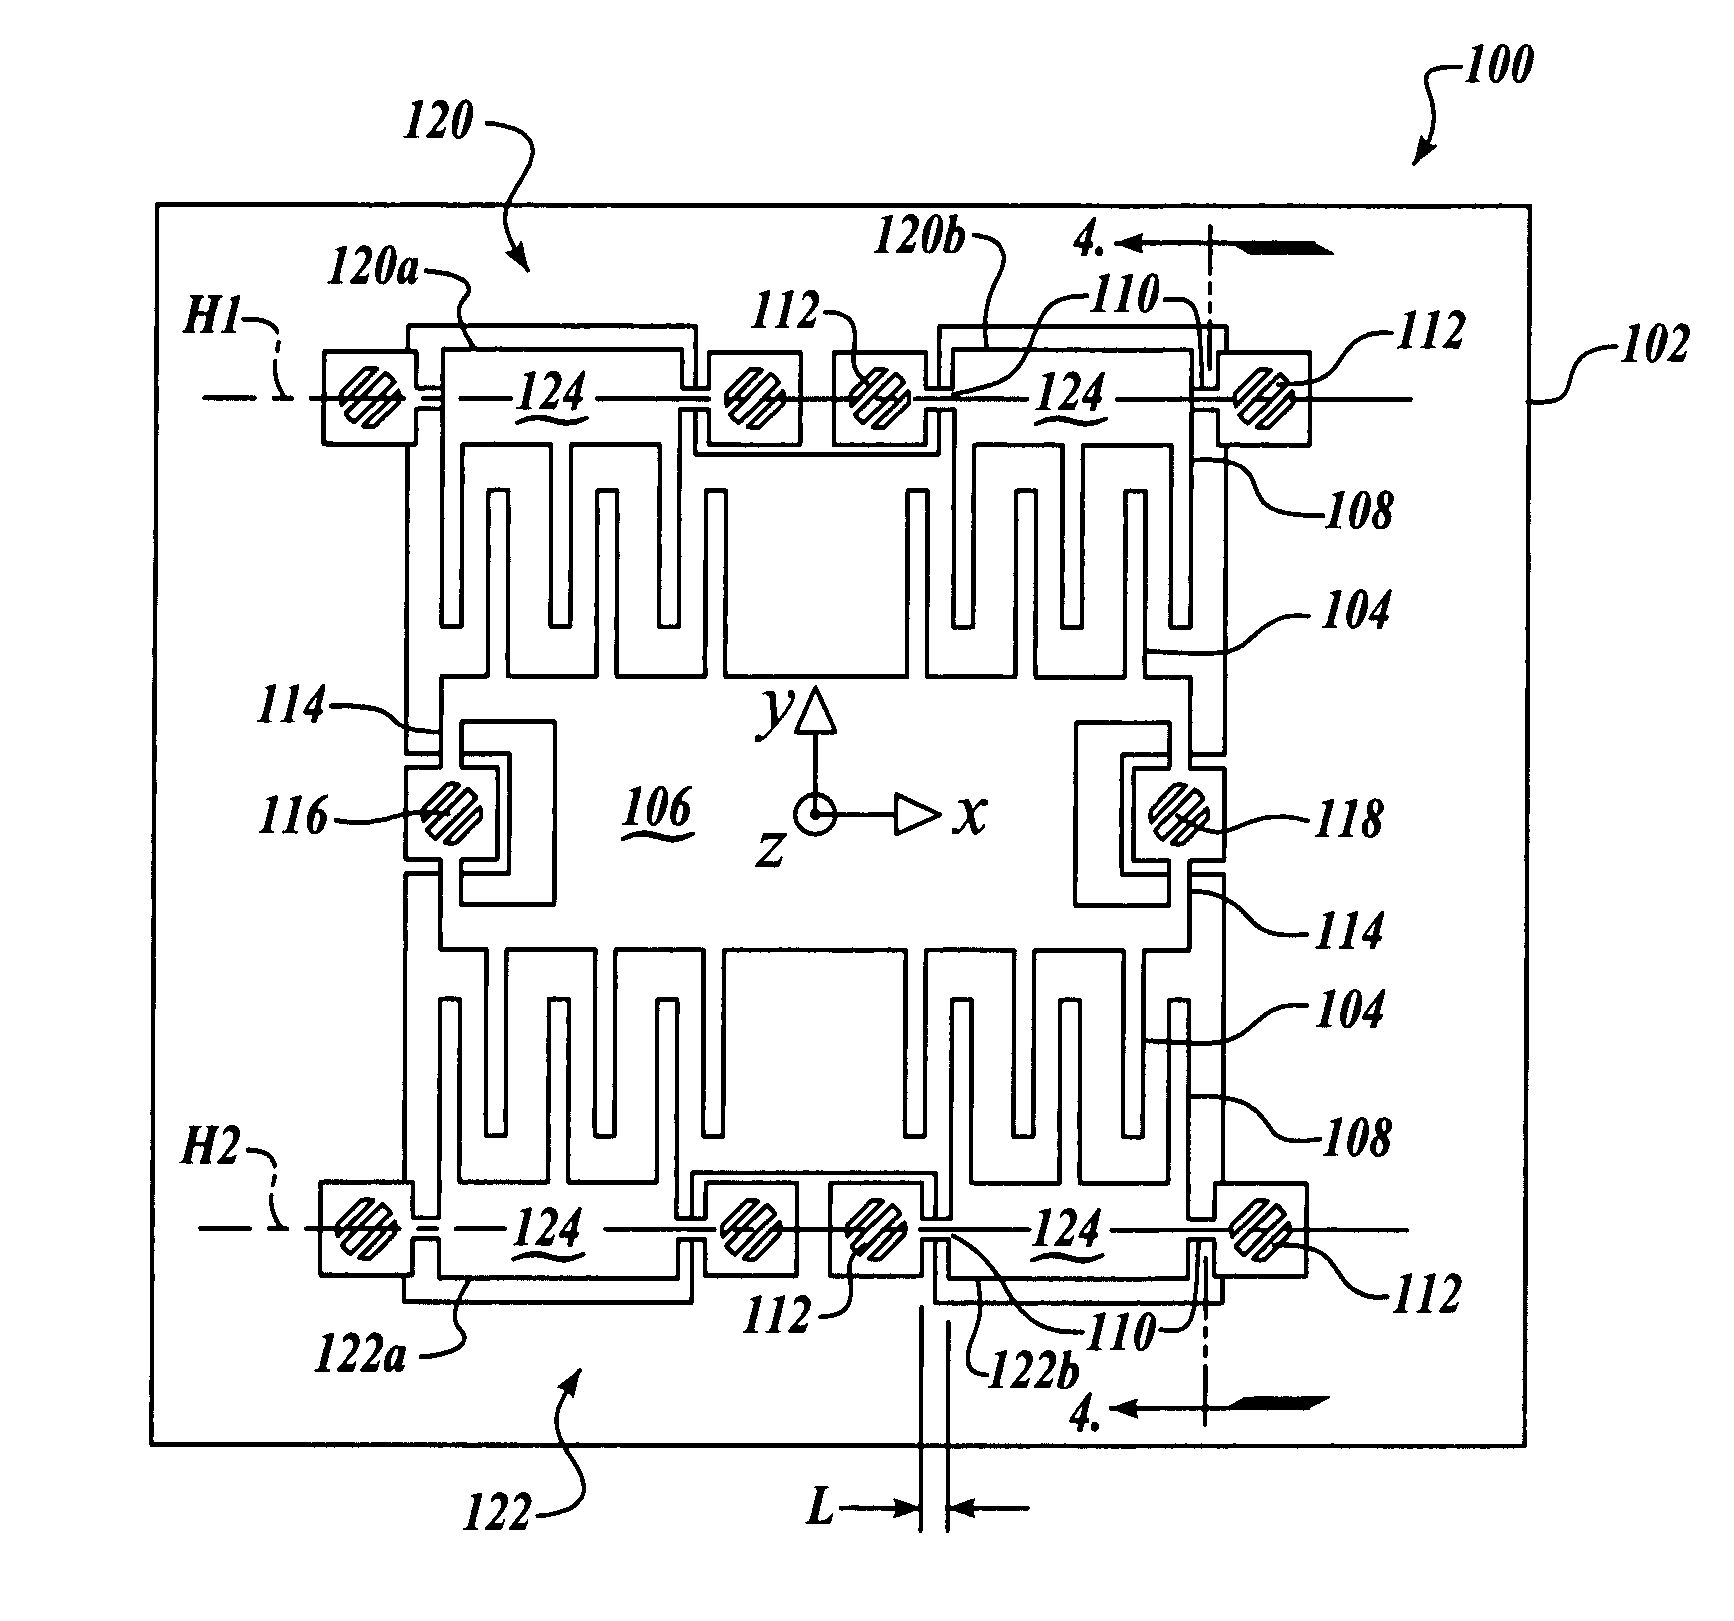 Out-of-plane compensation suspension for an accelerometer